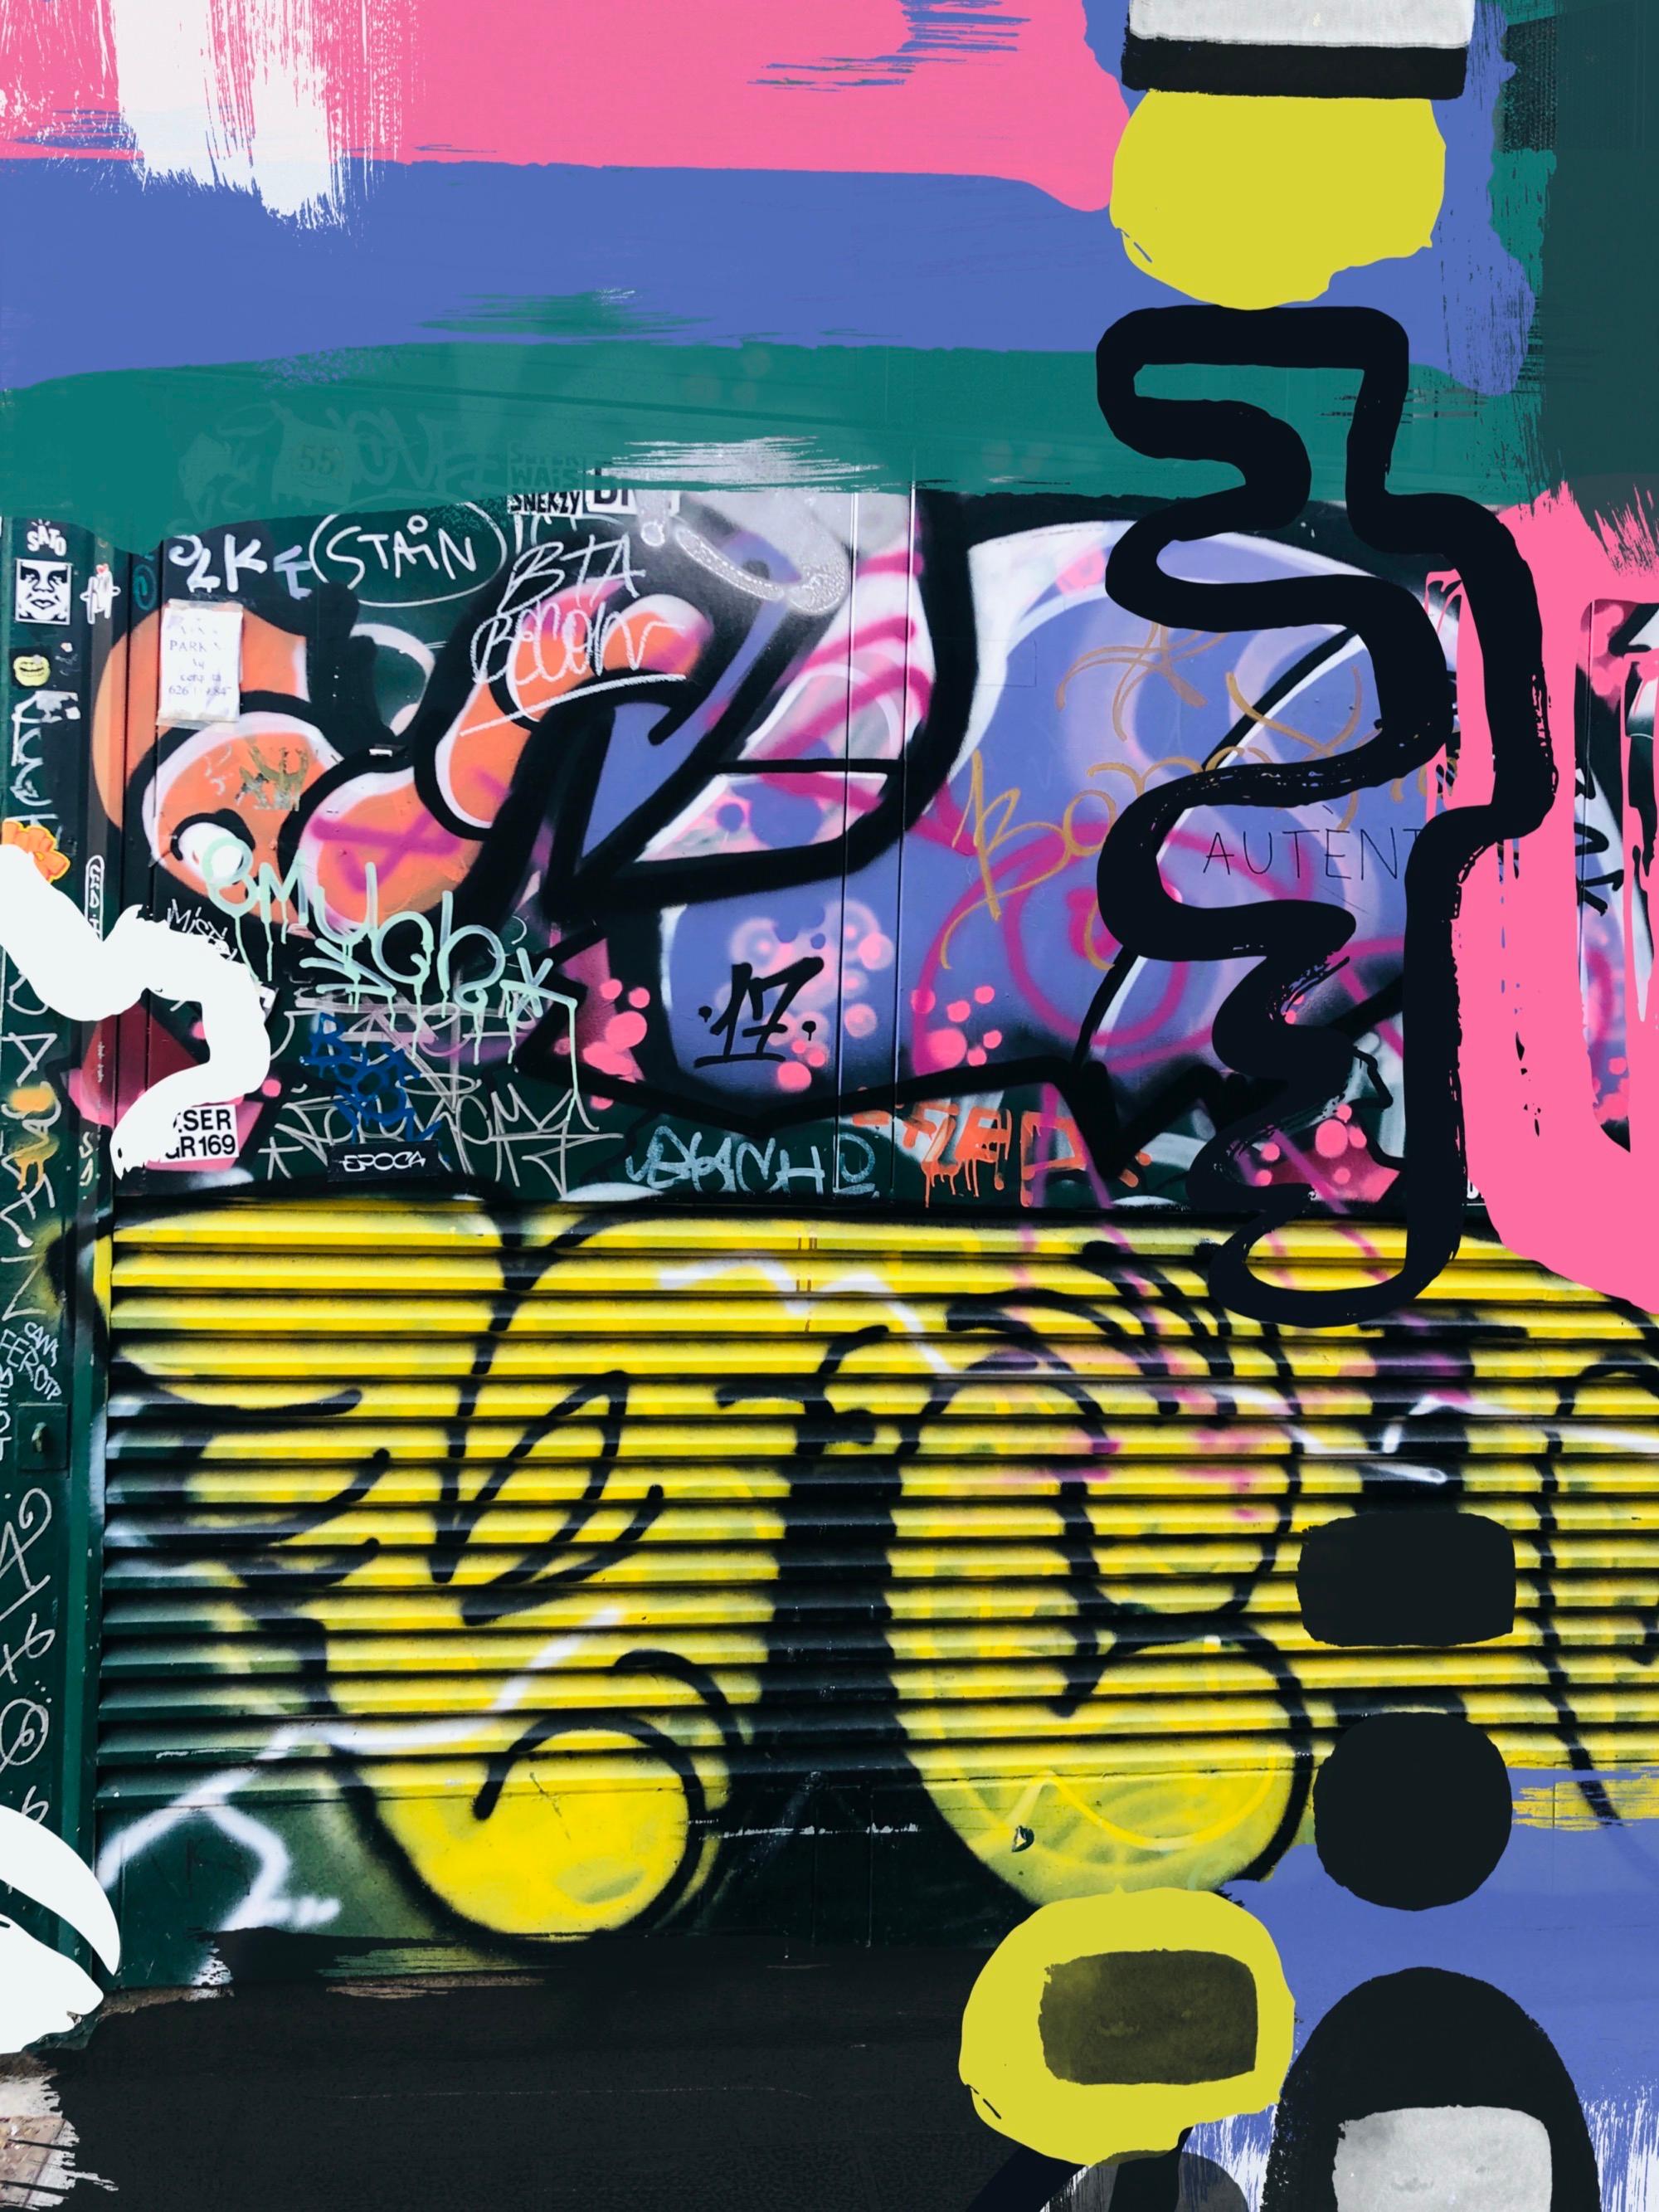 A colorful graffiti wall with a green, pink, and blue background and the word 